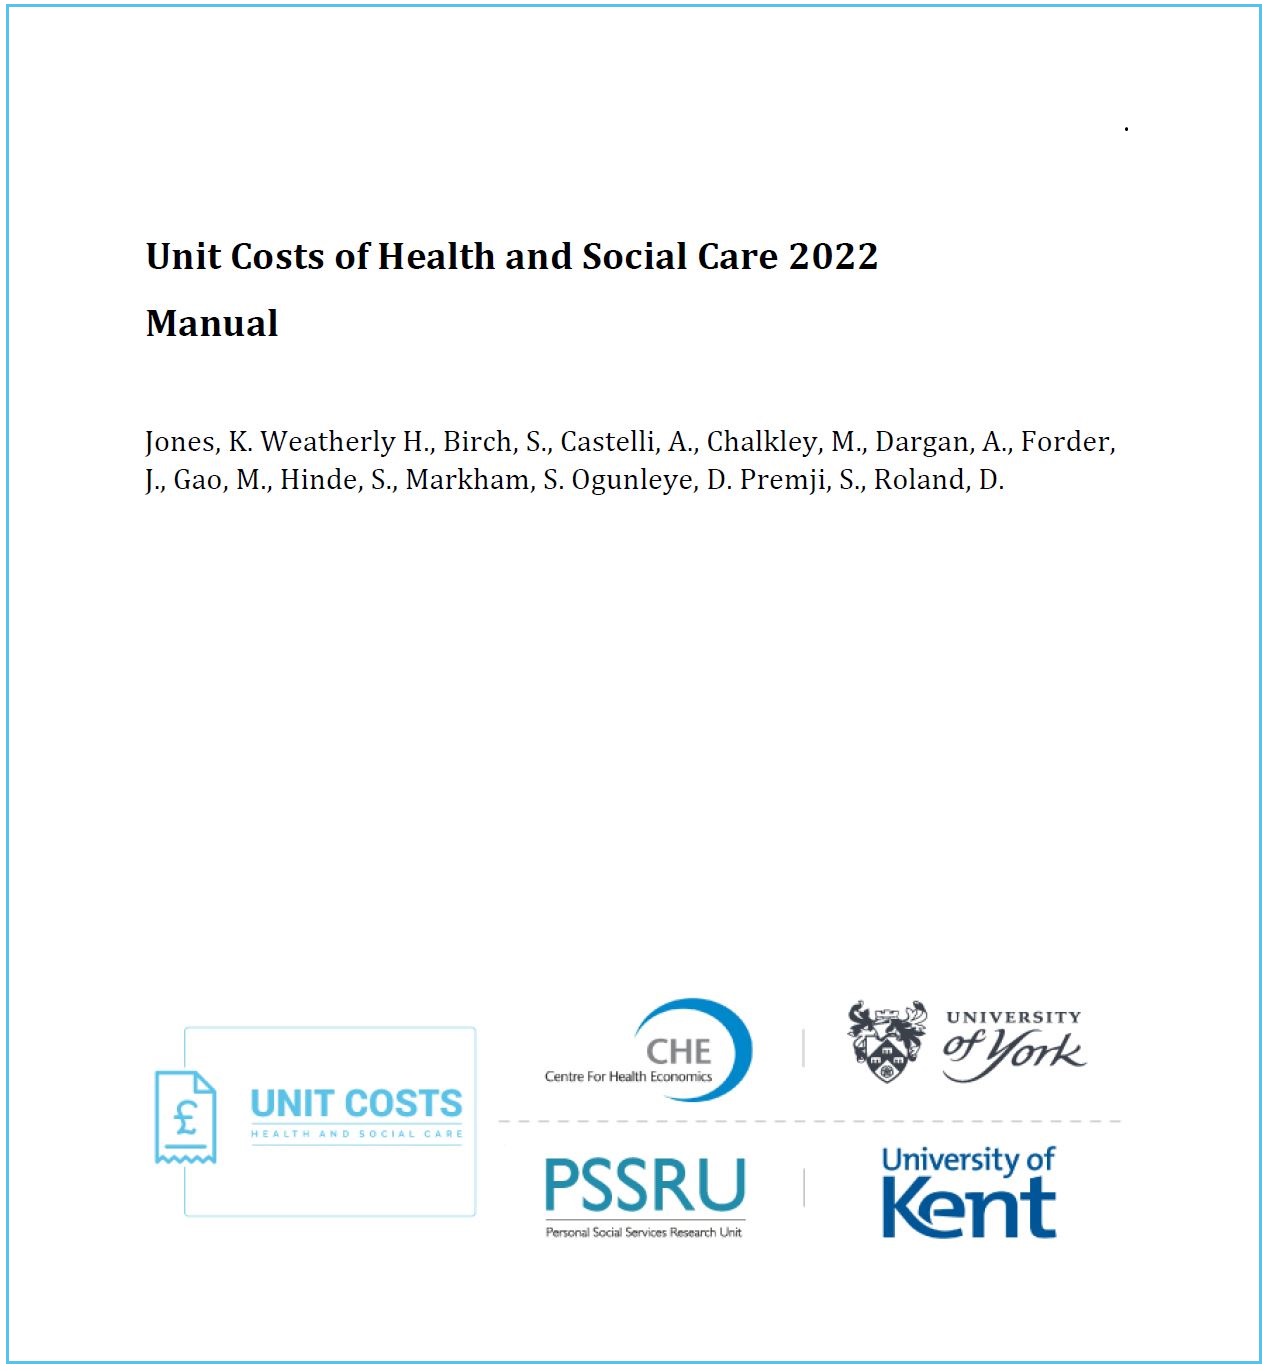 Picture of front page of new Unit Costs manual 2022